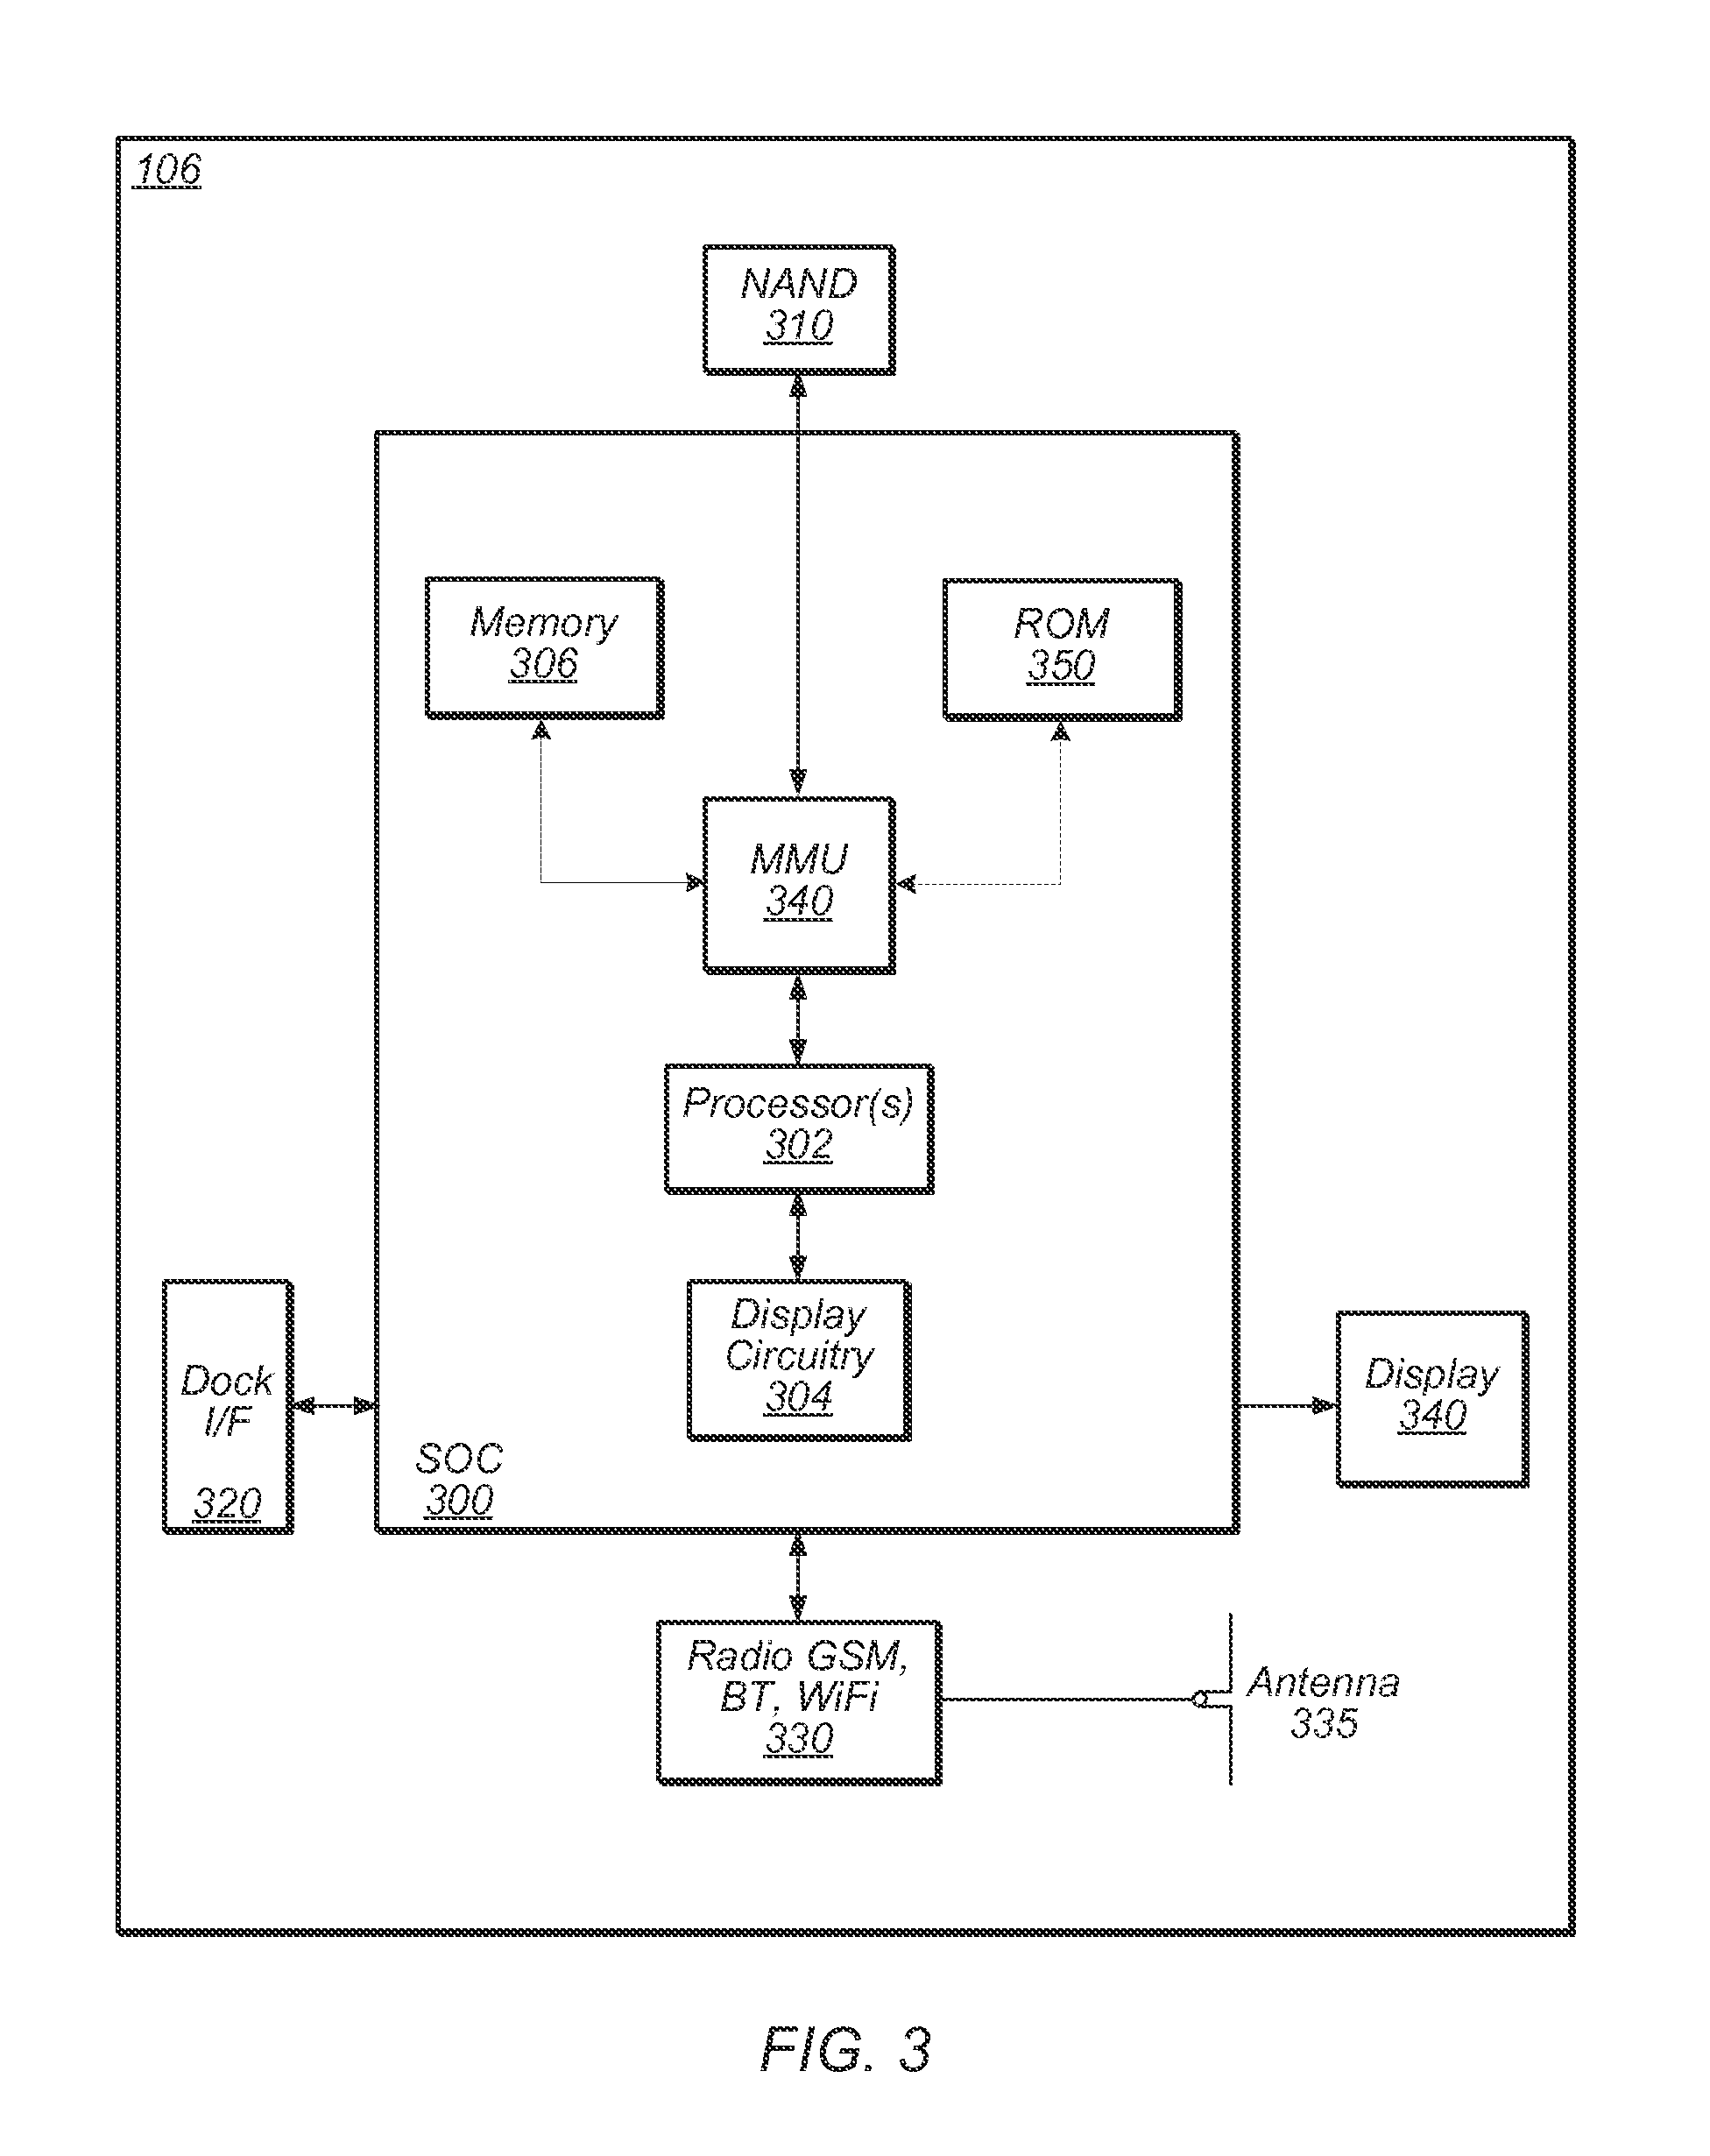 Peer-Peer Device Activation and Setup